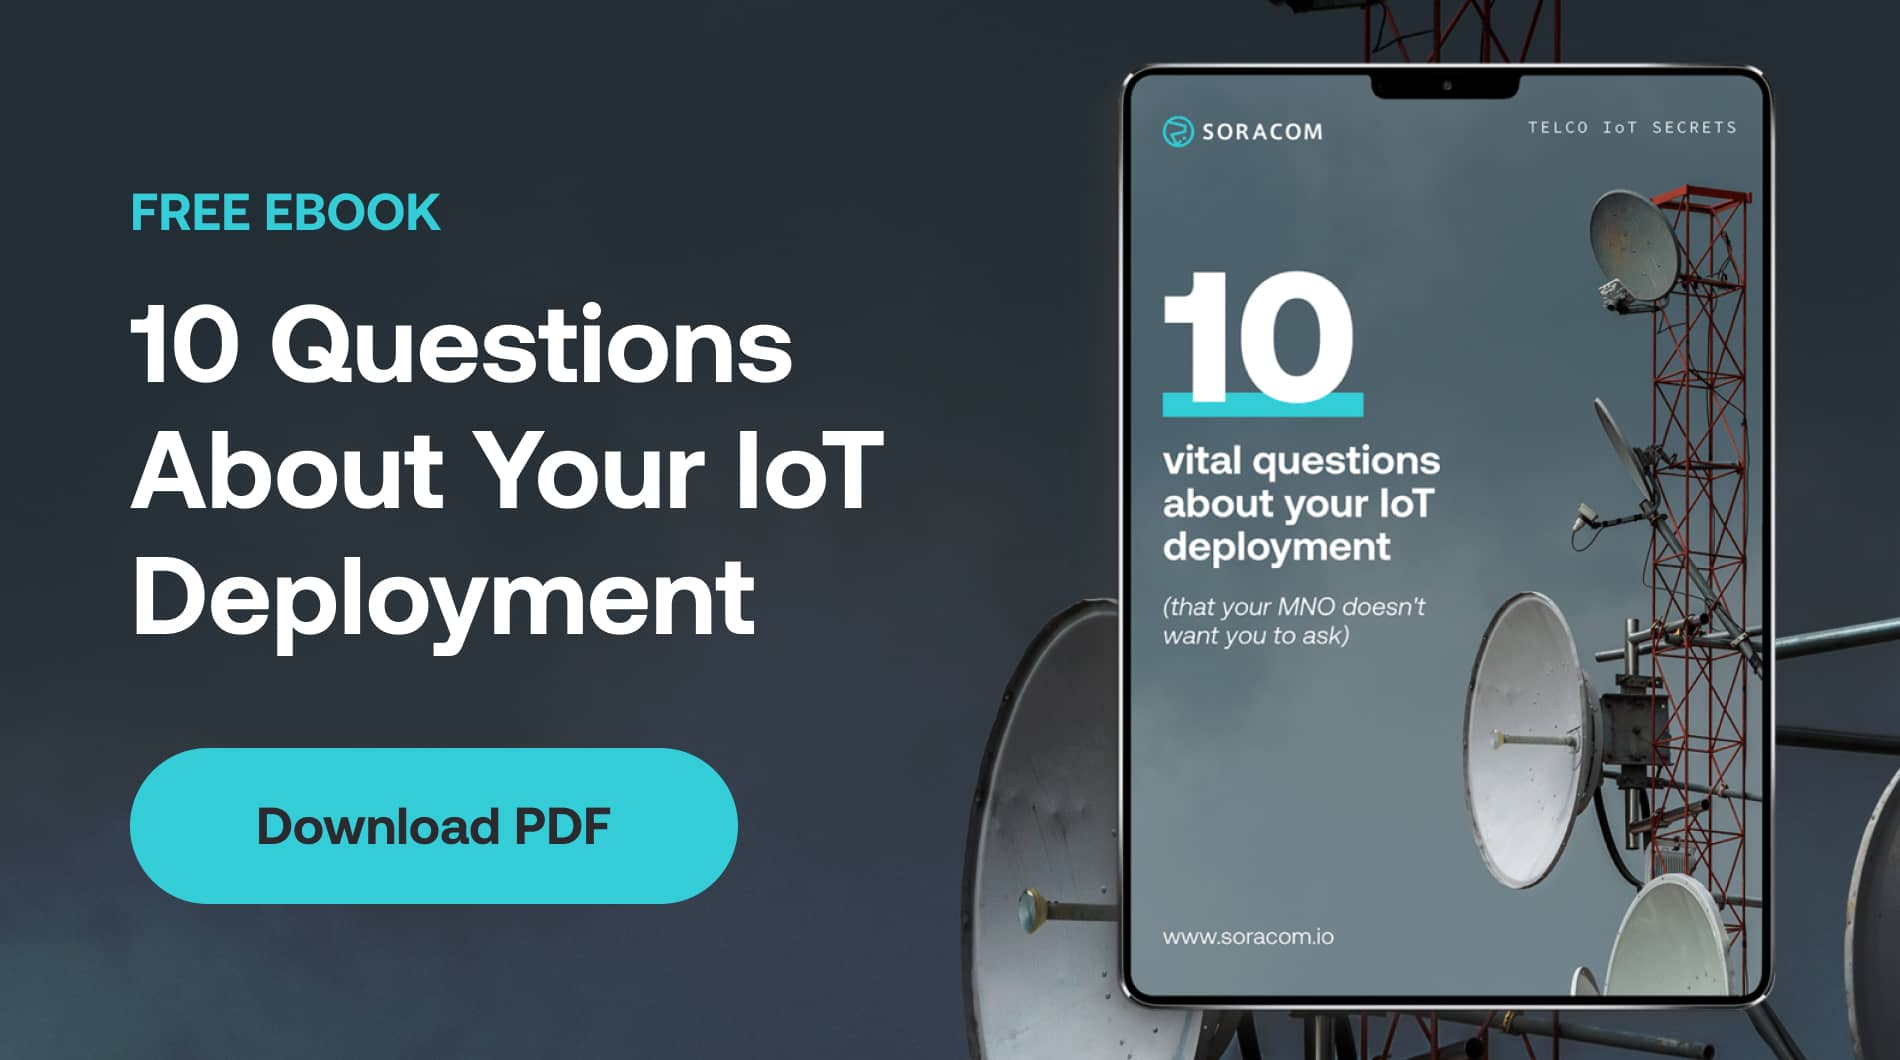 10 Vital Questions About Your IoT Deployment – More info